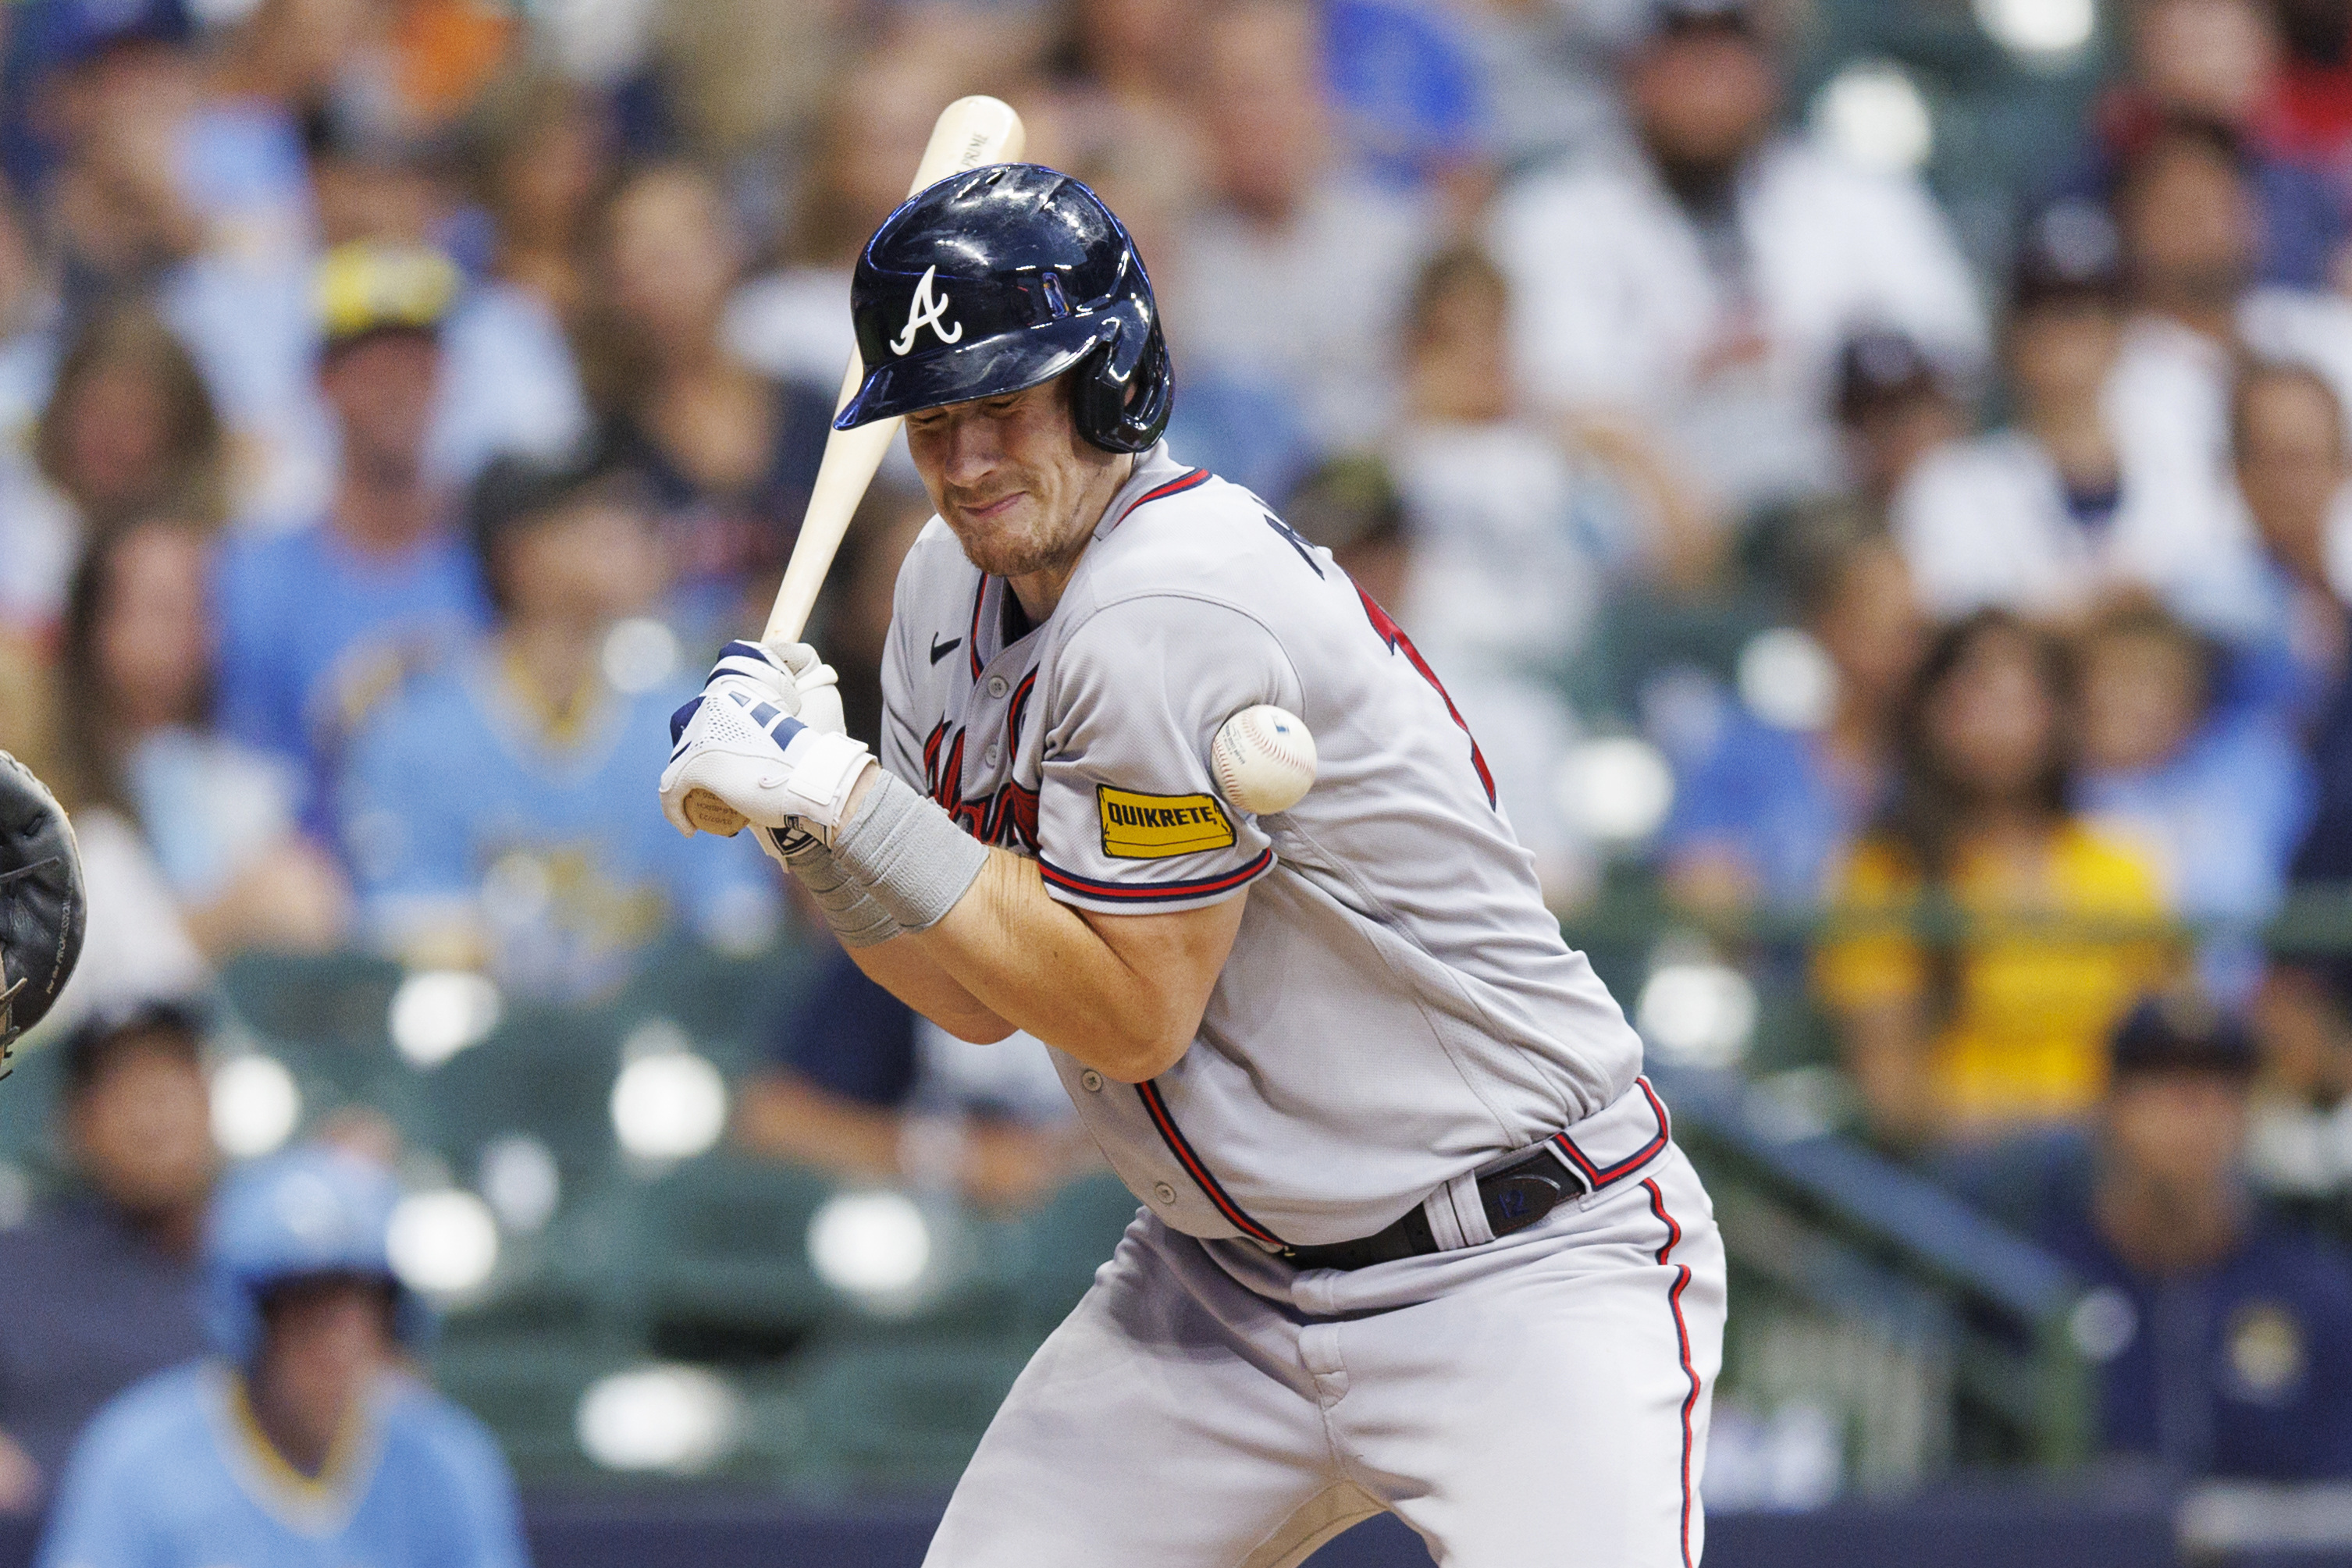 Another Phillips homer lifts Braves over Brewers